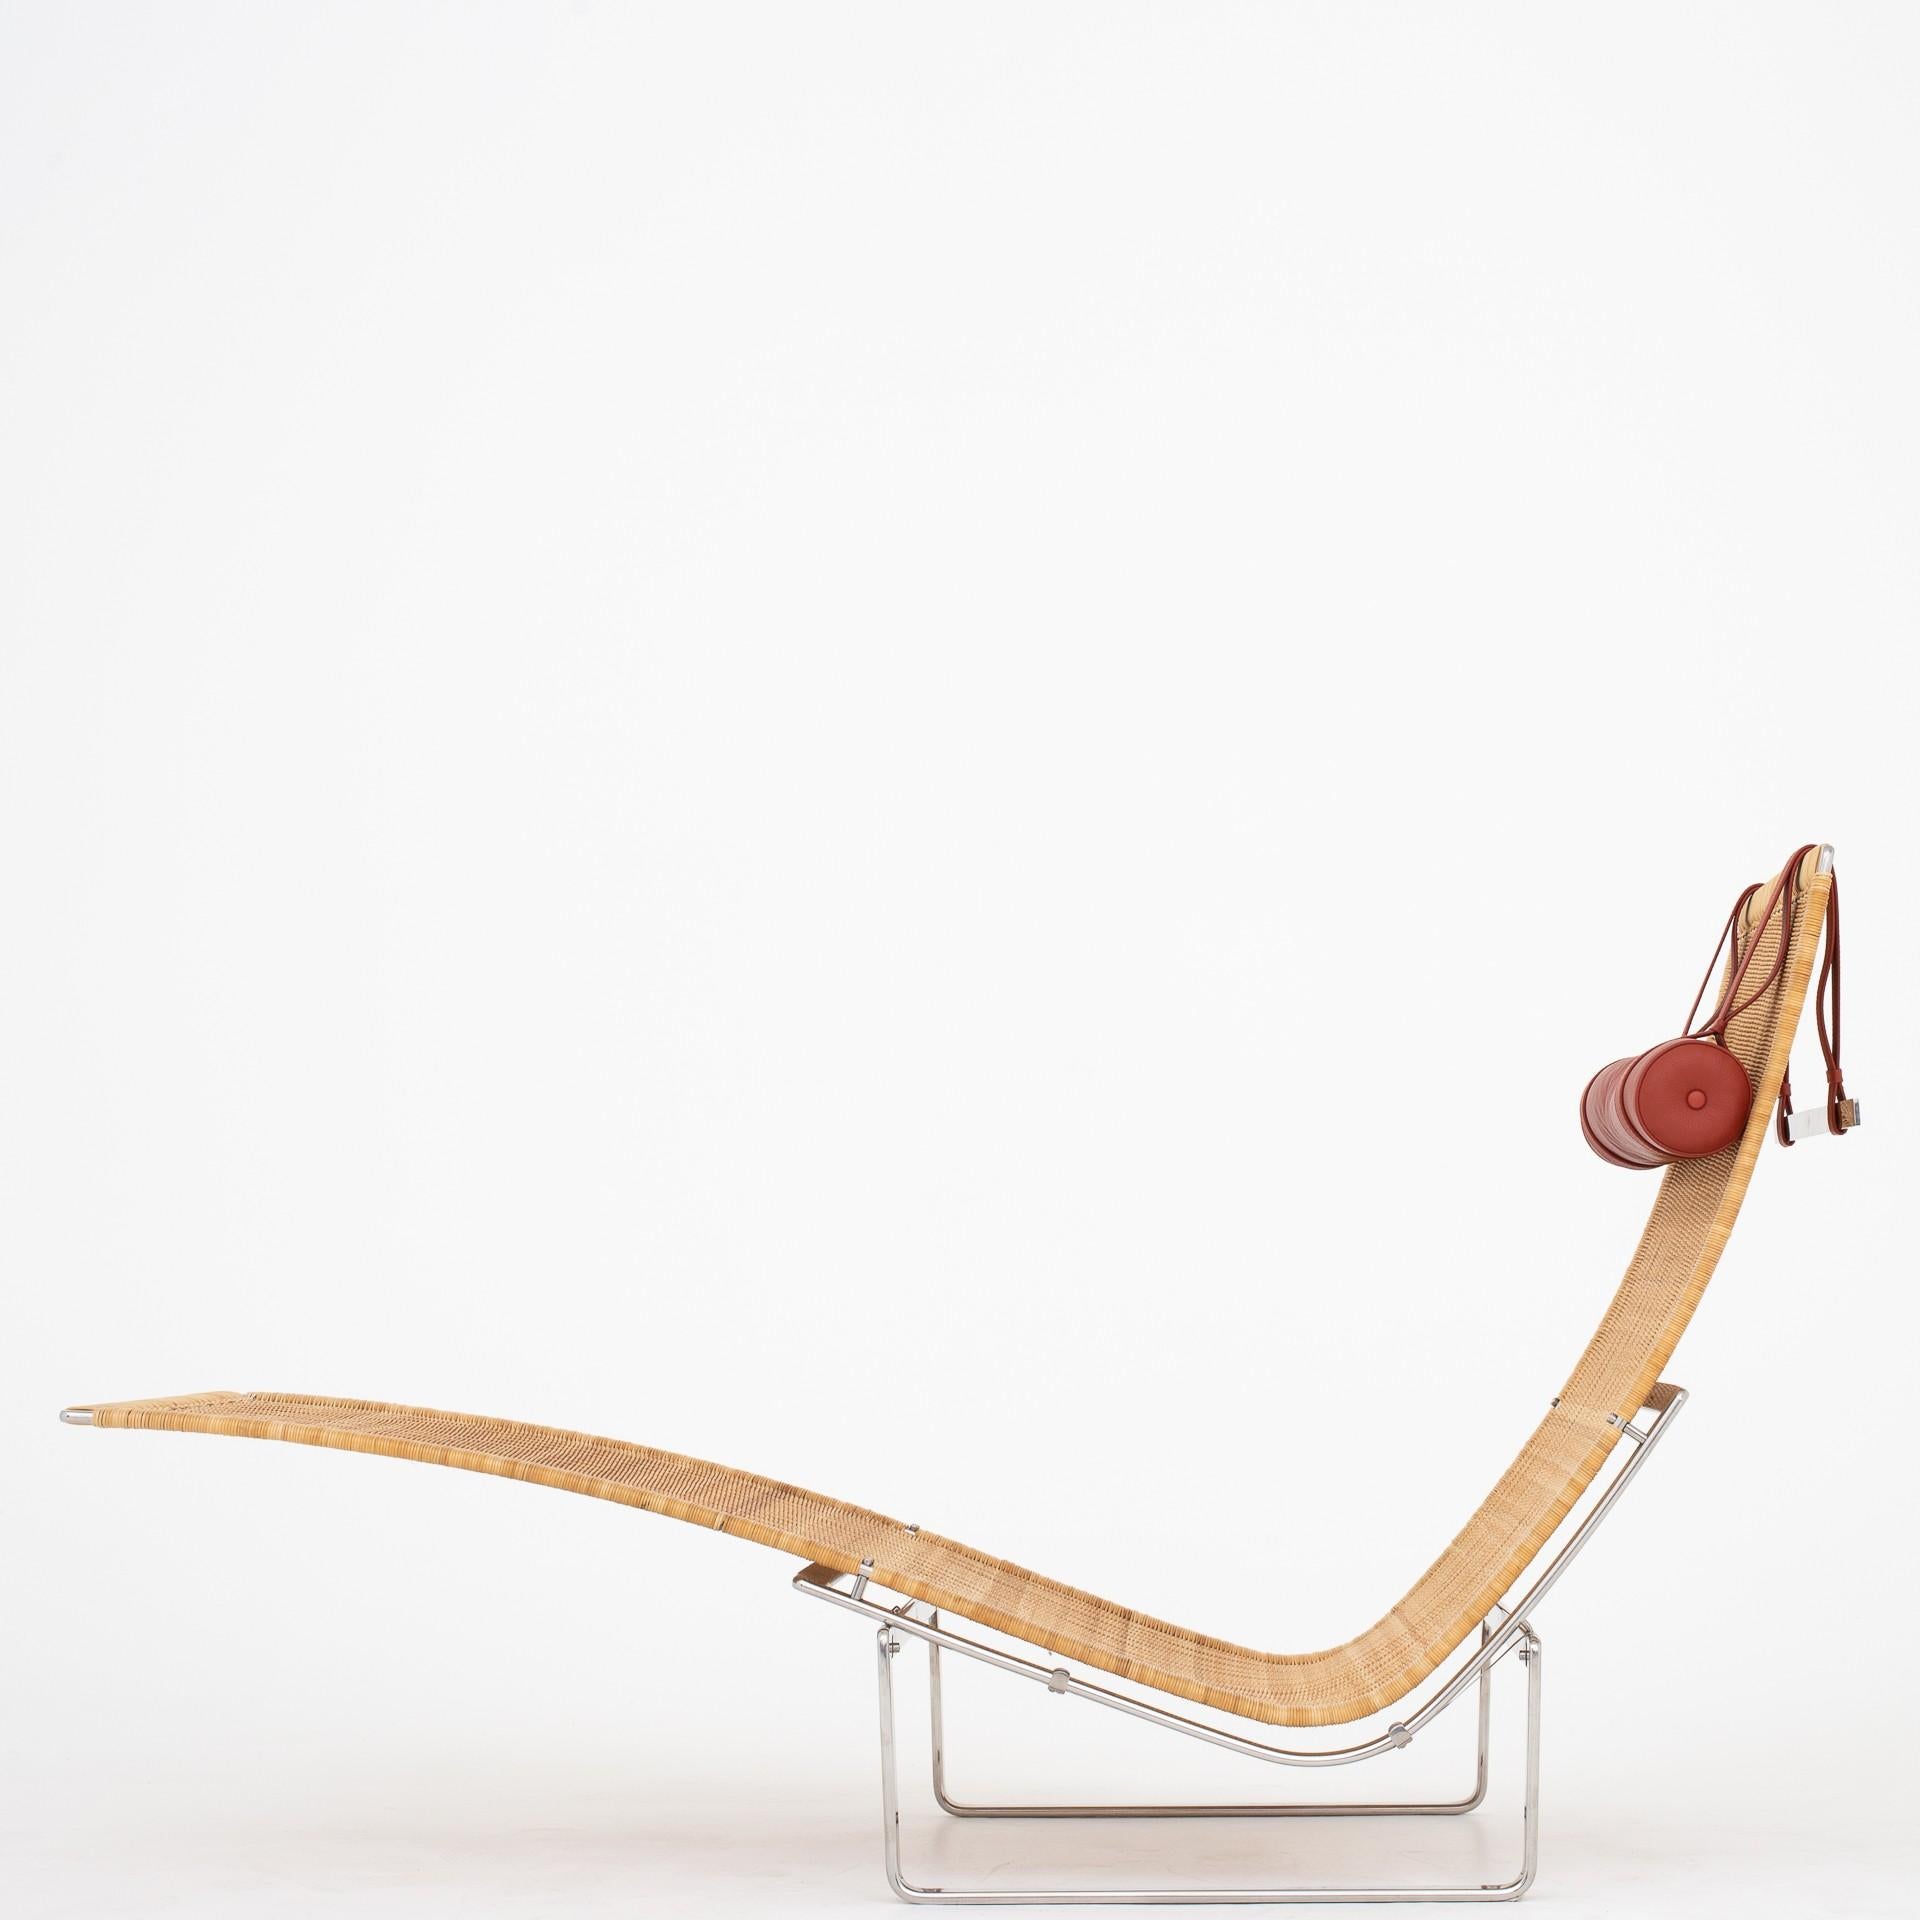 PK 24 - chaise lounge in cane on a steel frame. Neck pillow in red leather. Maker Fritz Hansen.